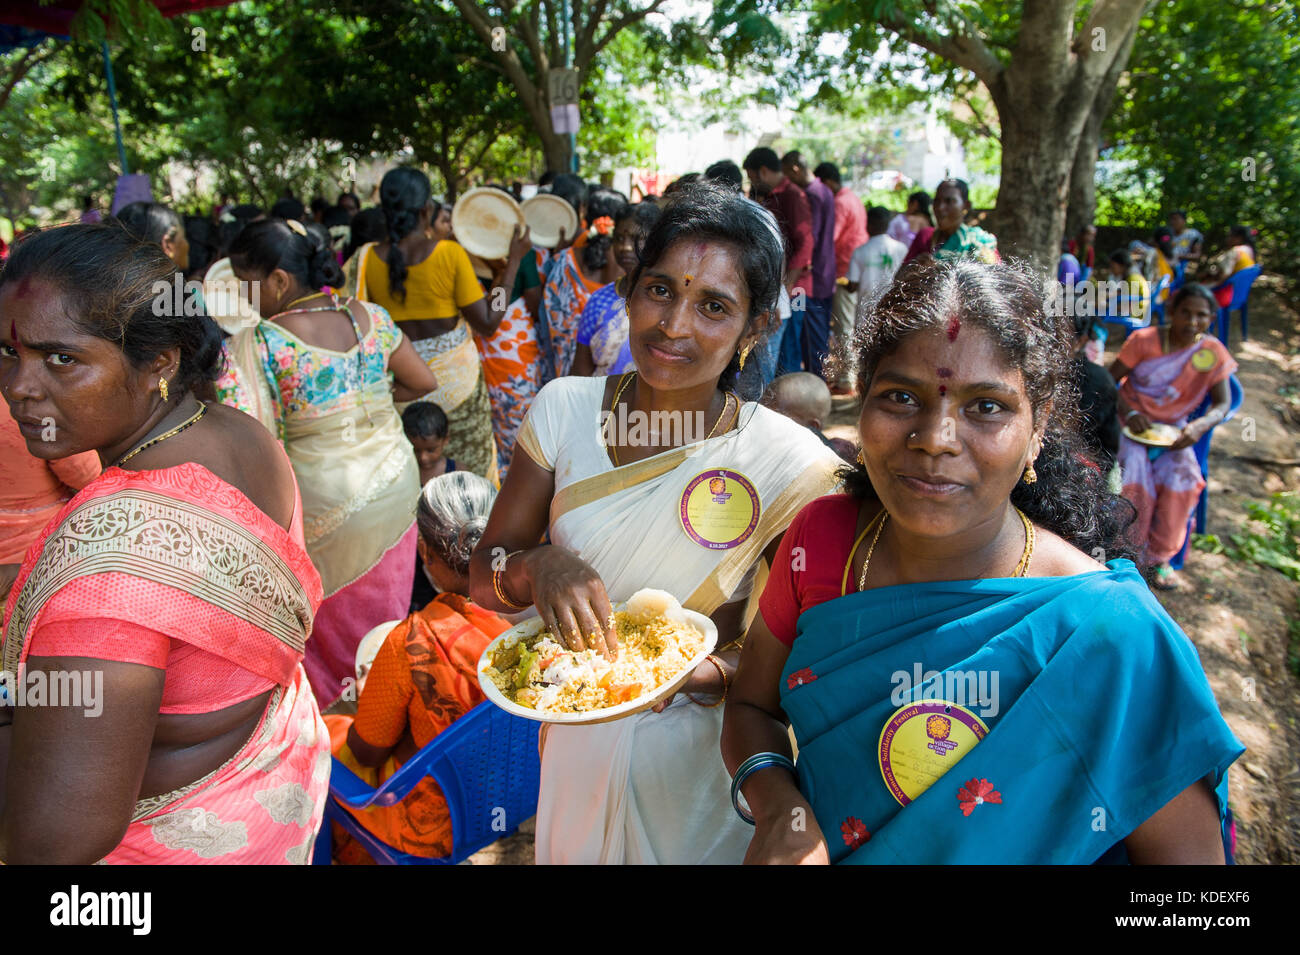 The 21st Annual Women's Solidarity Festival at AVAG. A power packed event with 5000 women from the Bio-region of Auroville joining the celebrations! E Stock Photo